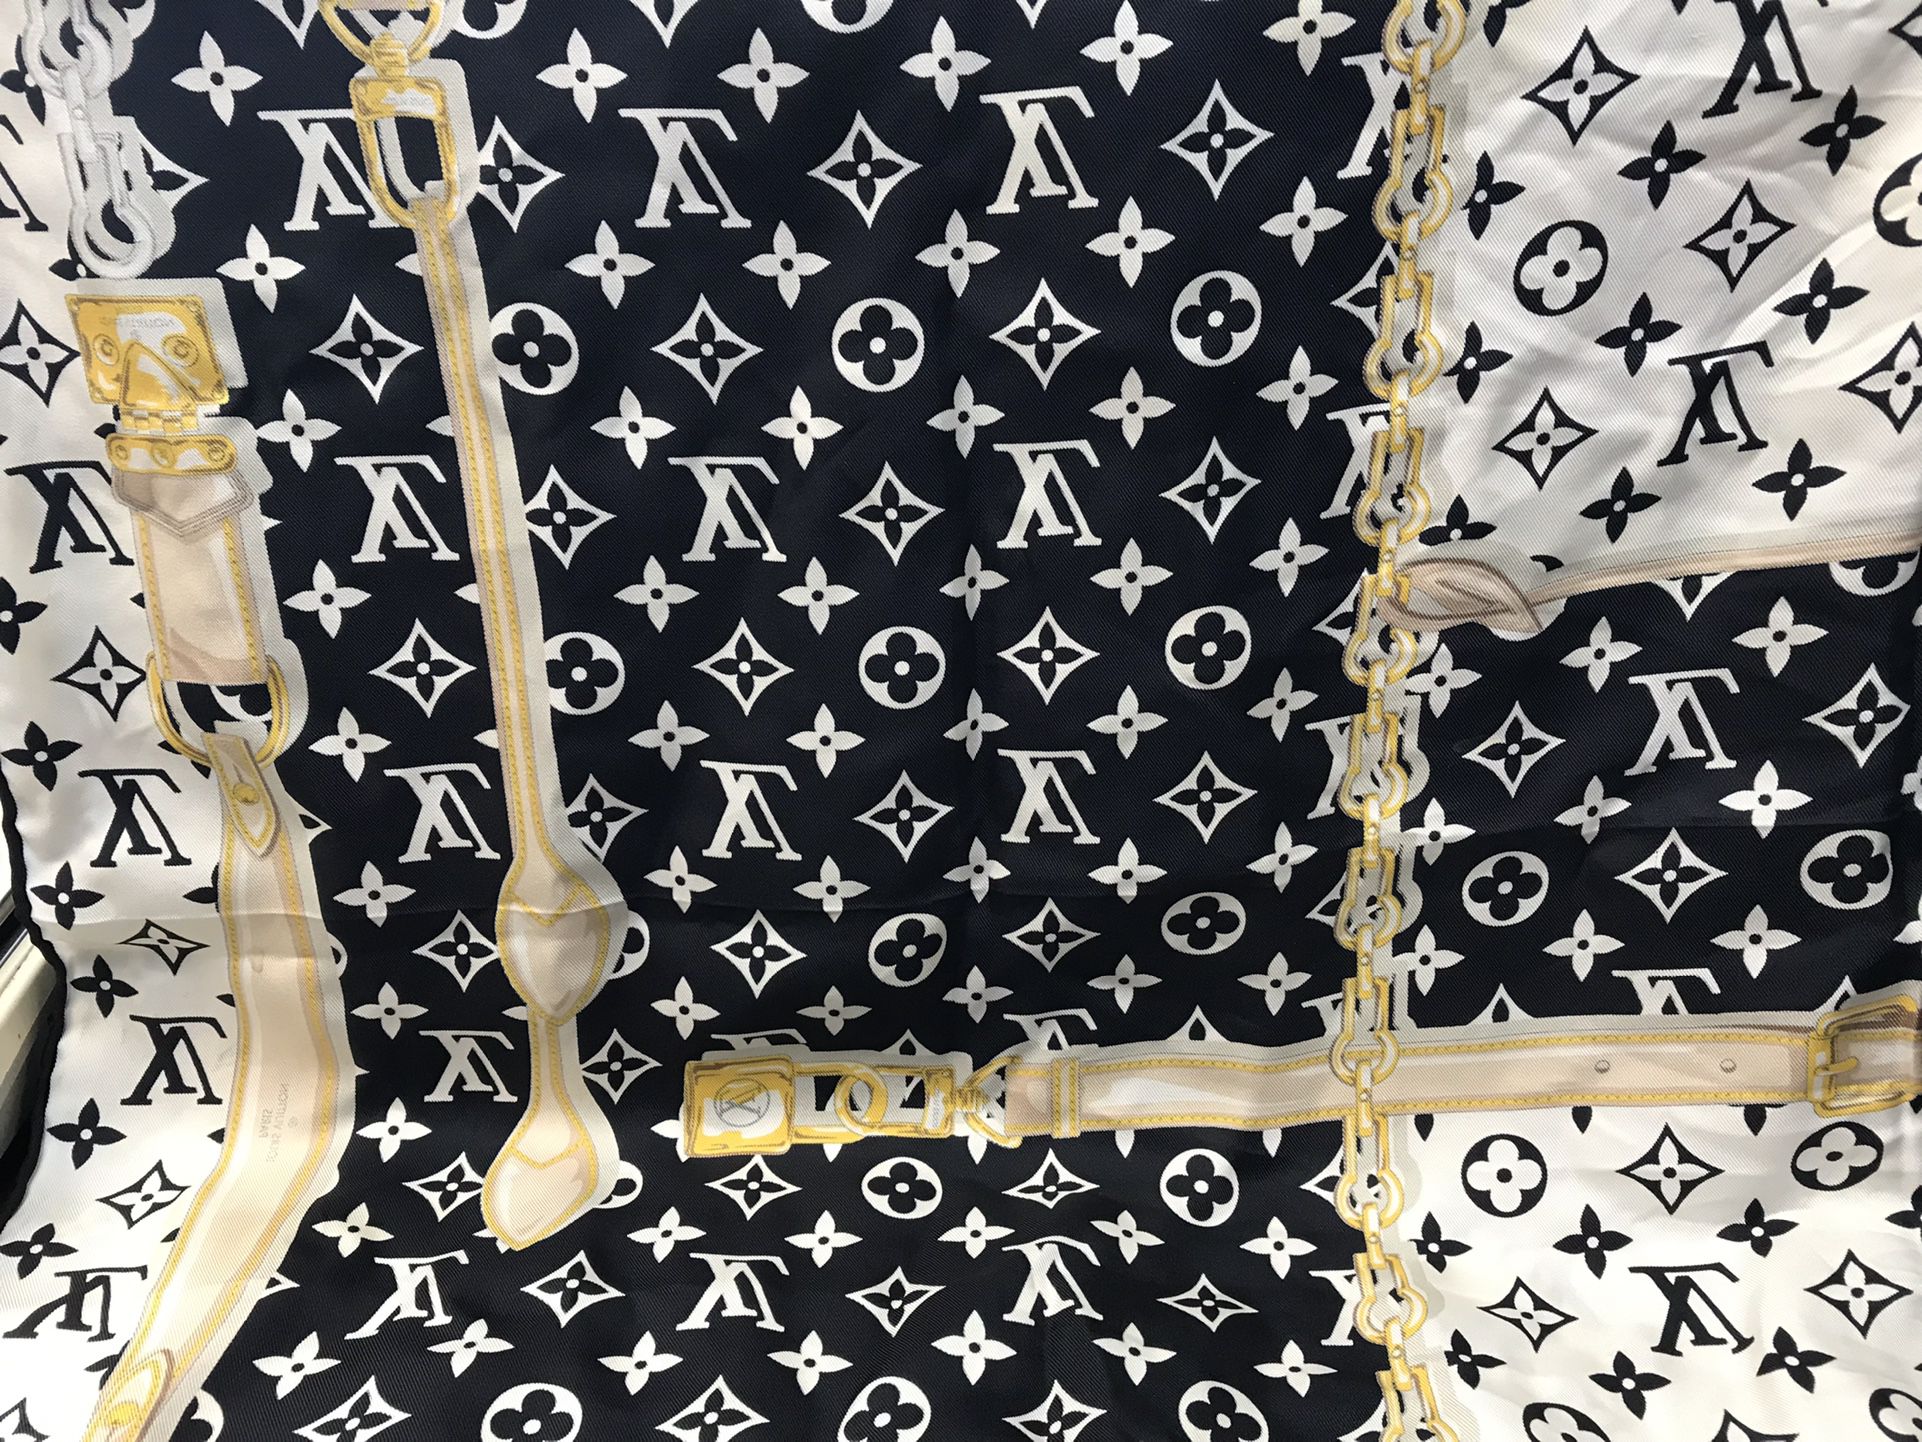 Brand New Louis Vuitton Monogram Bandana Short-Sleeved Shirt (Size: Medium)  for Sale in Valley Stream, NY - OfferUp